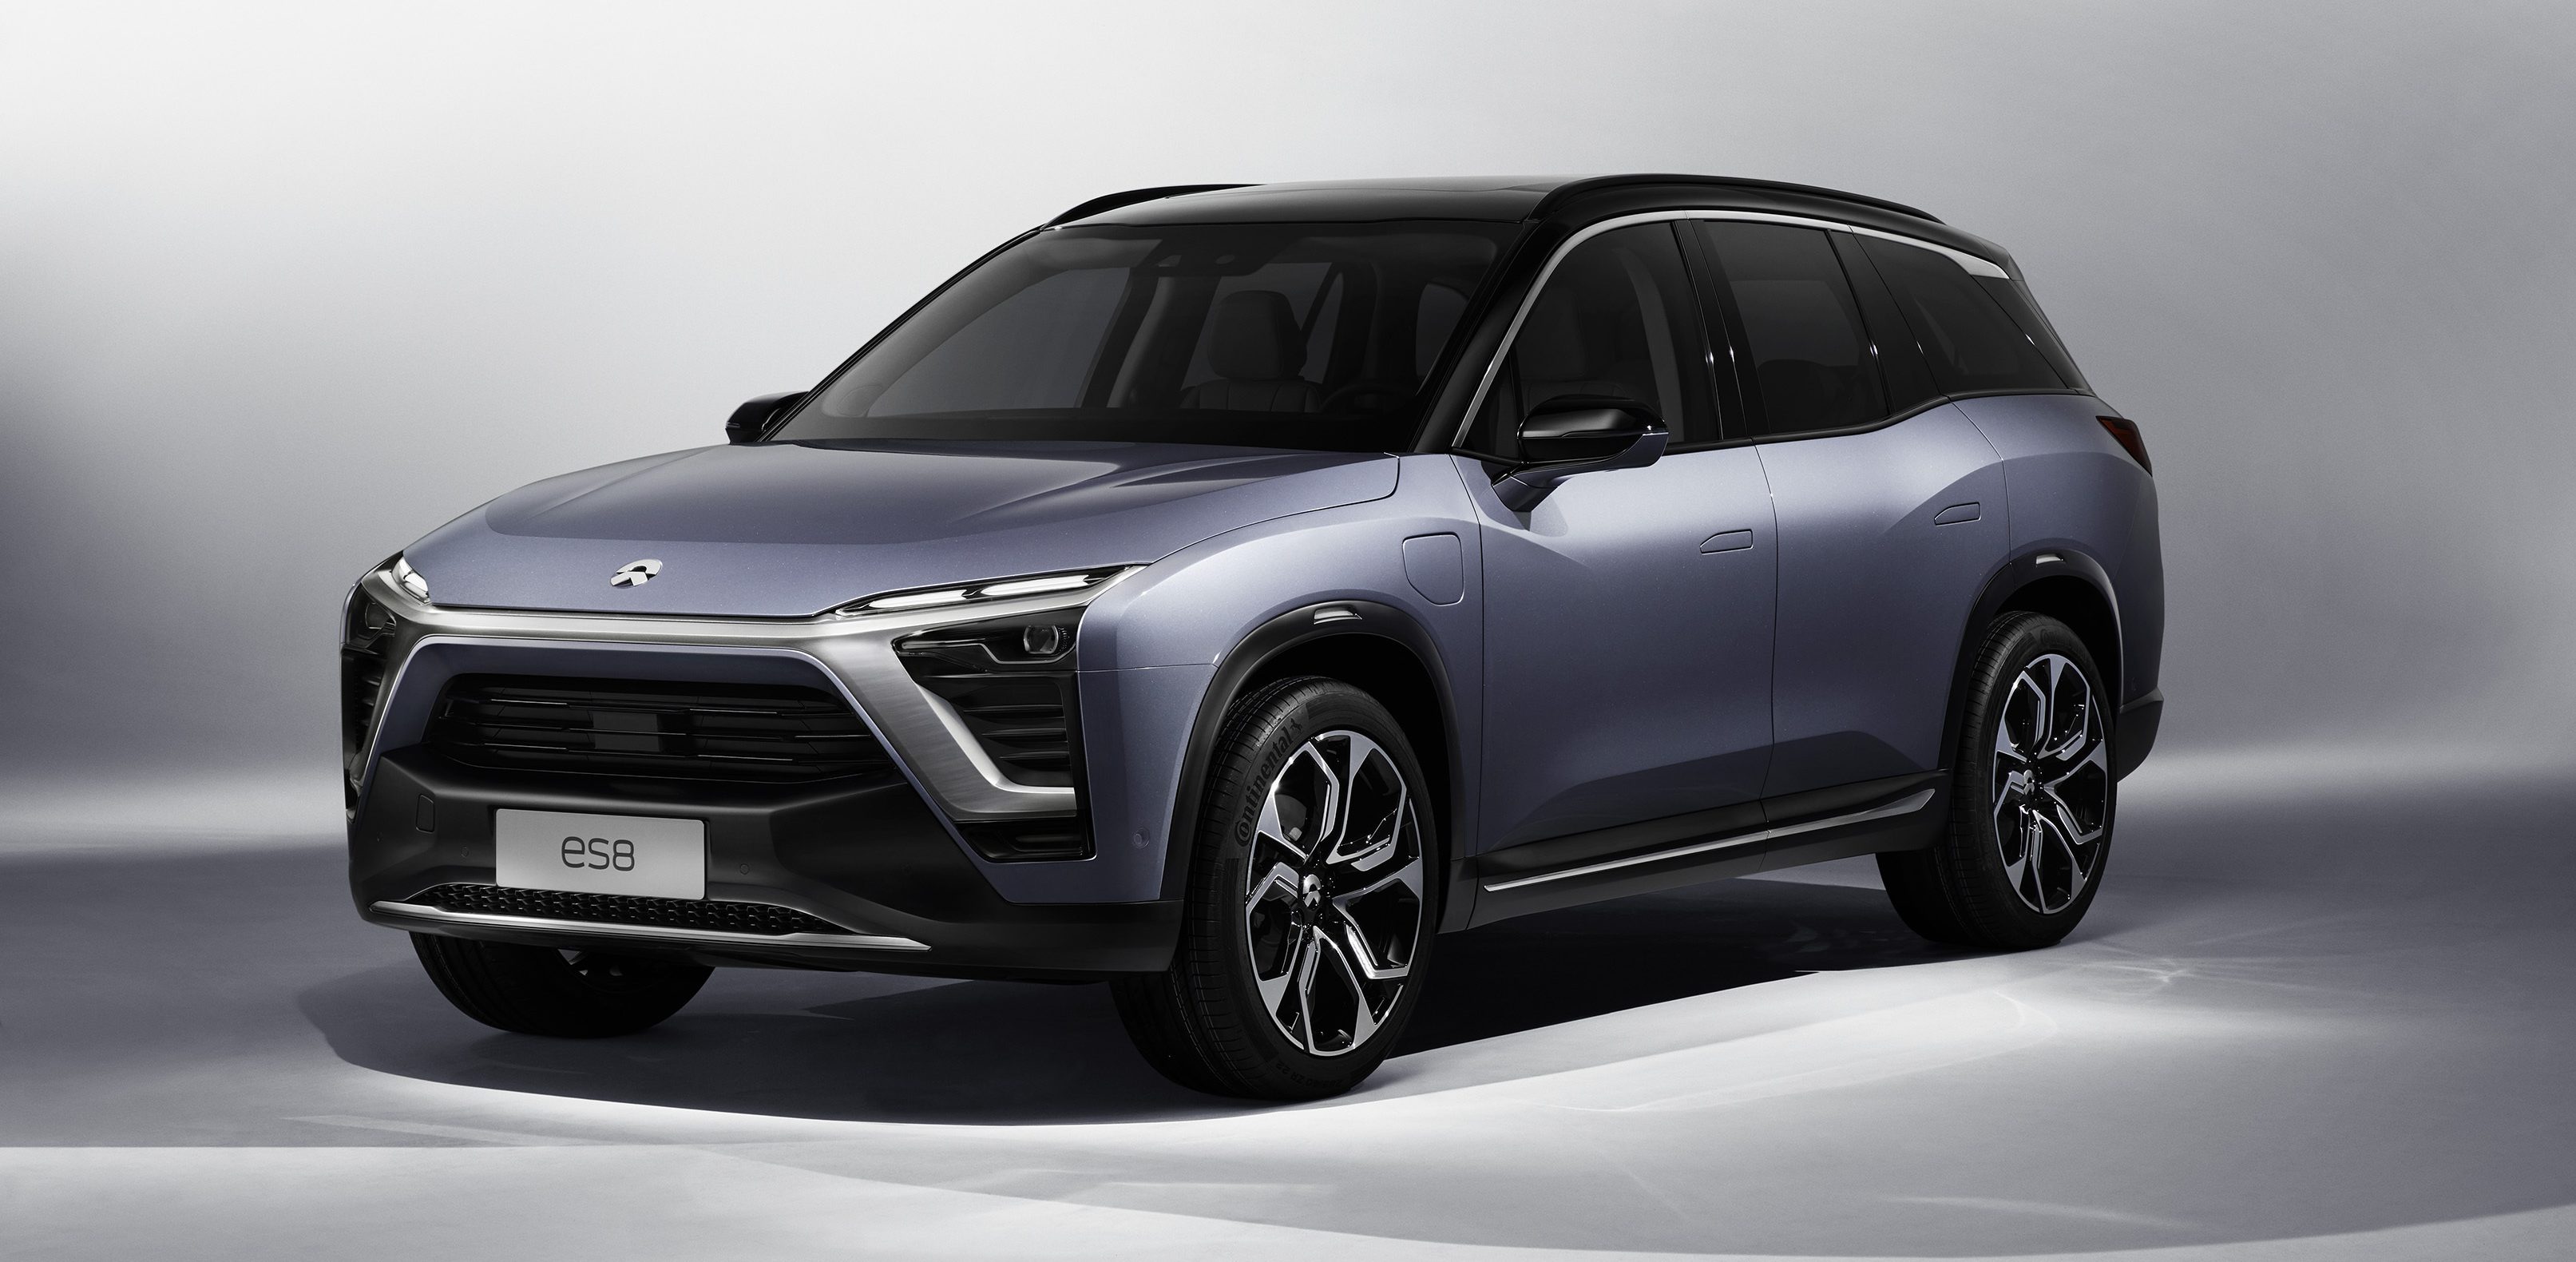 NIO unveils its first production electric vehicle 7seater SUV with